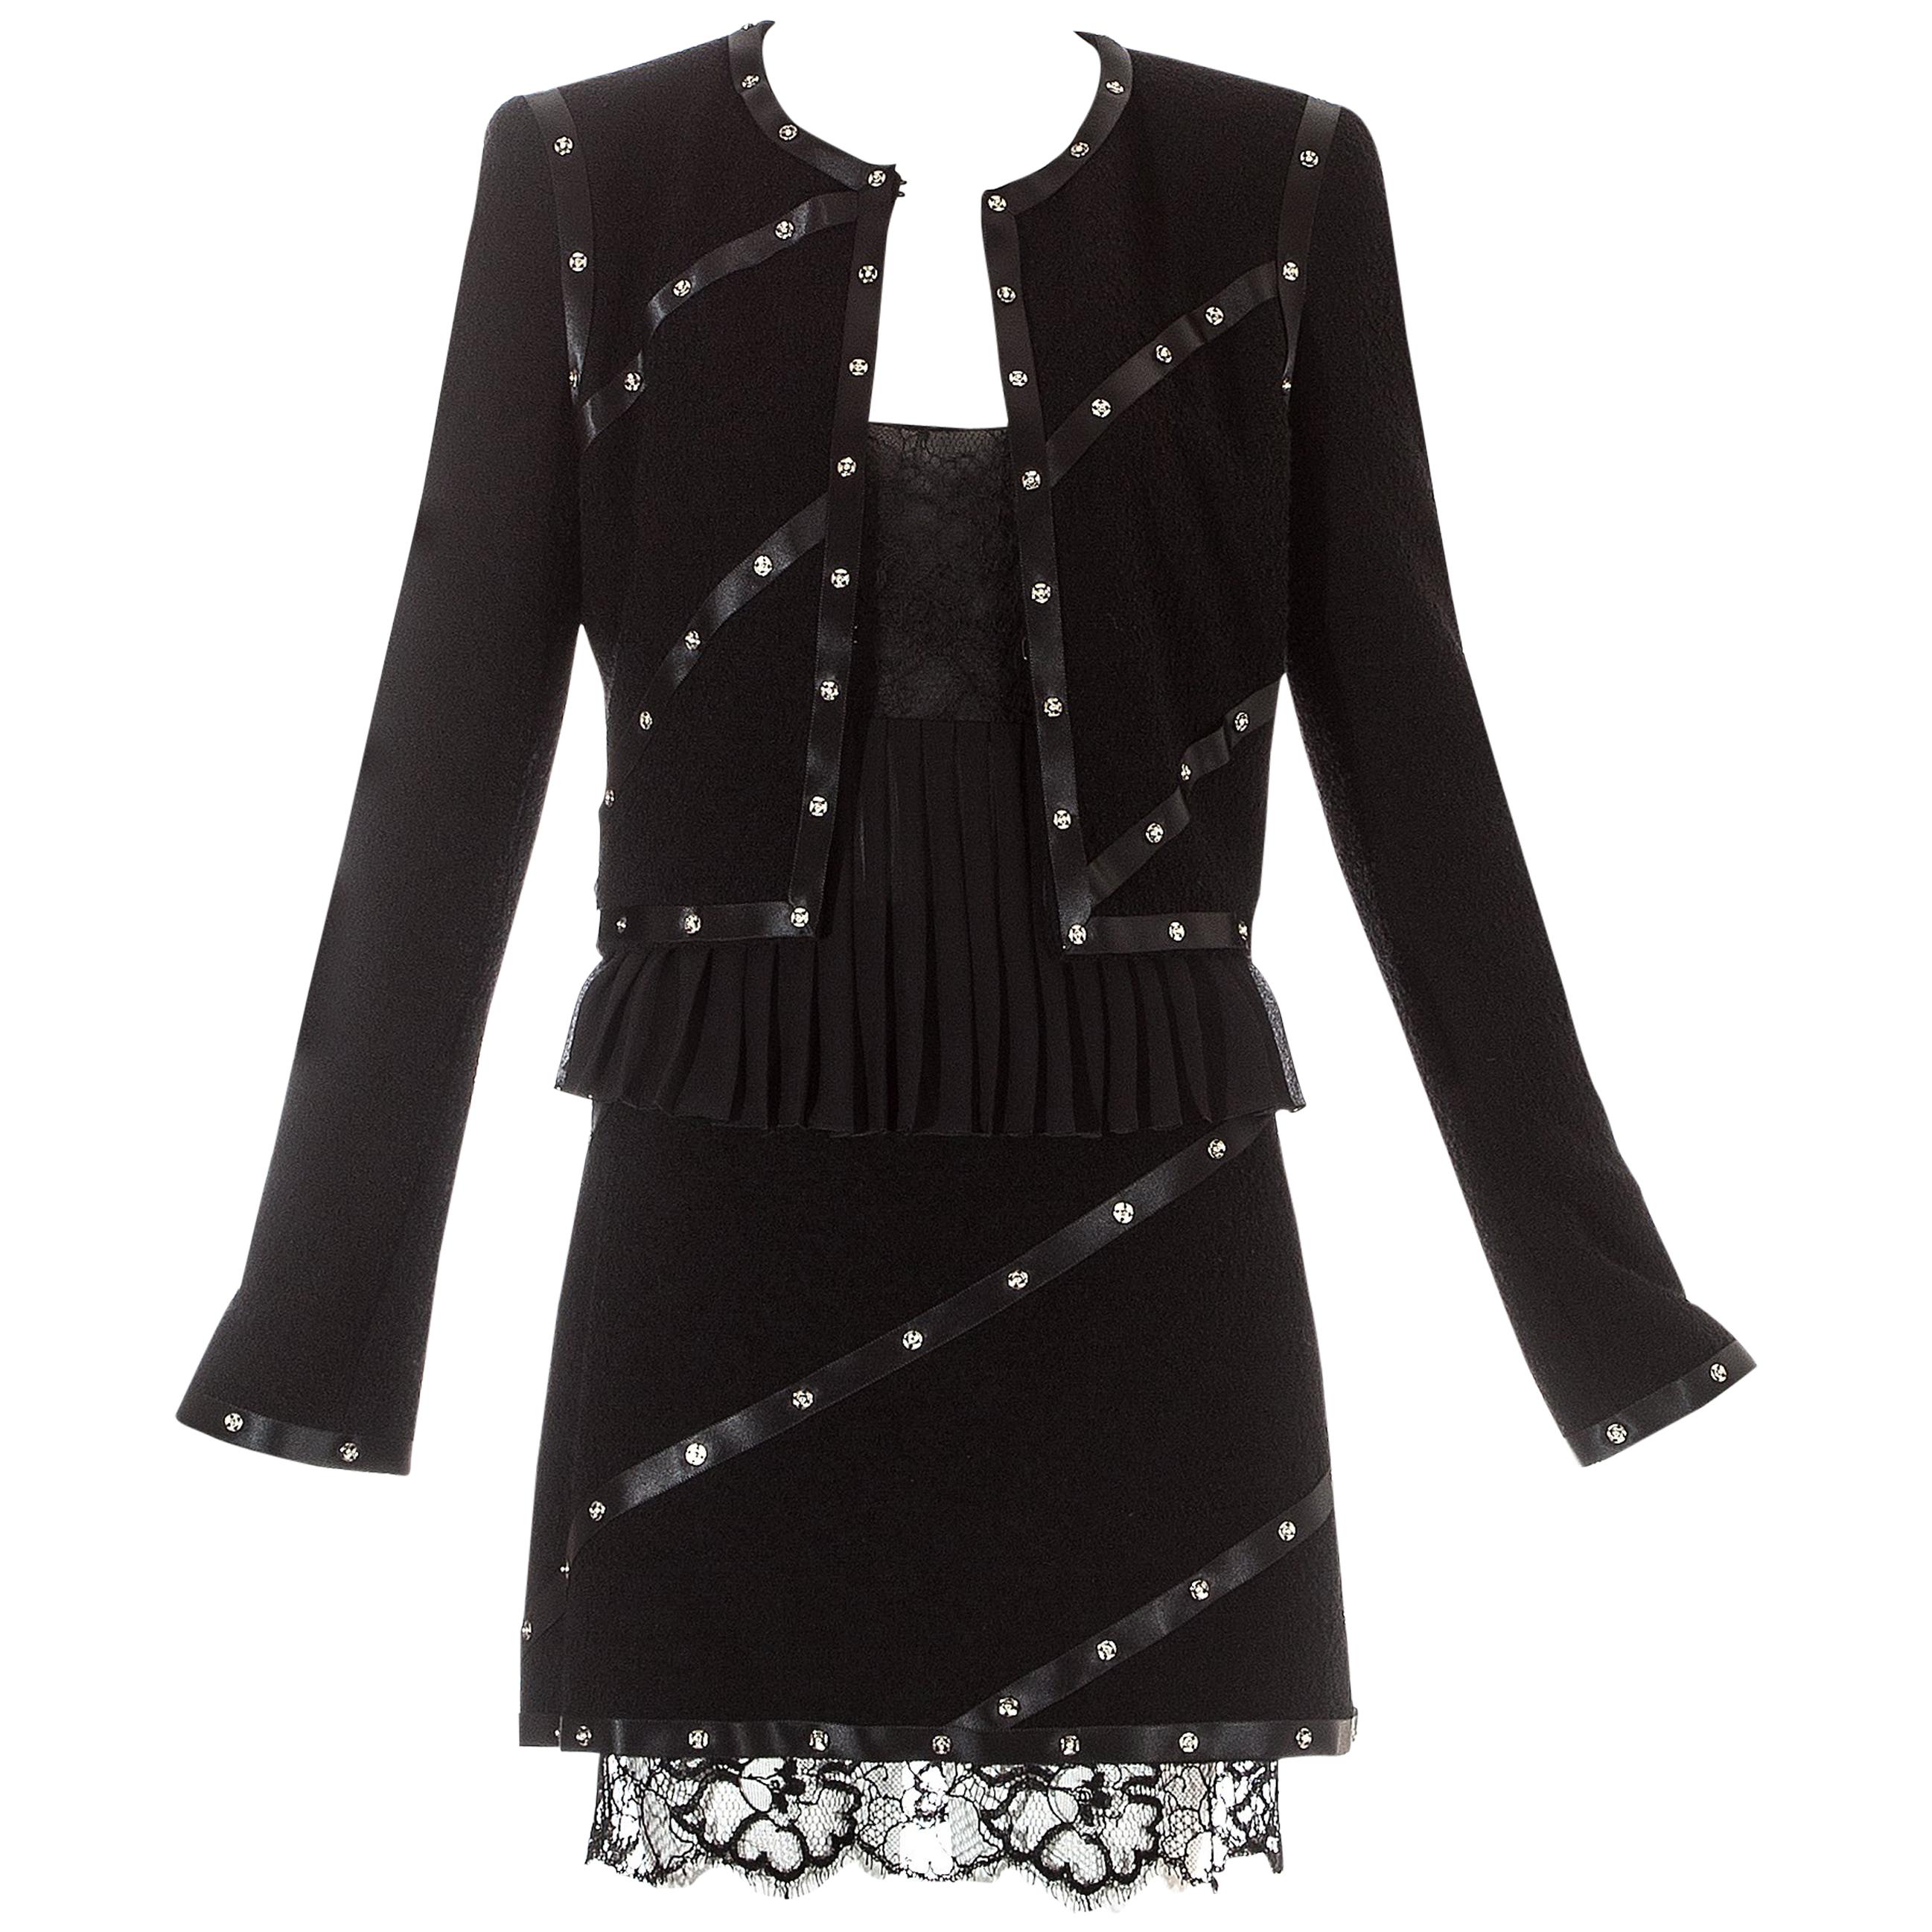 Chanel by Karl Lagerfeld black studded 3 piece skirt suit, A/W 2003